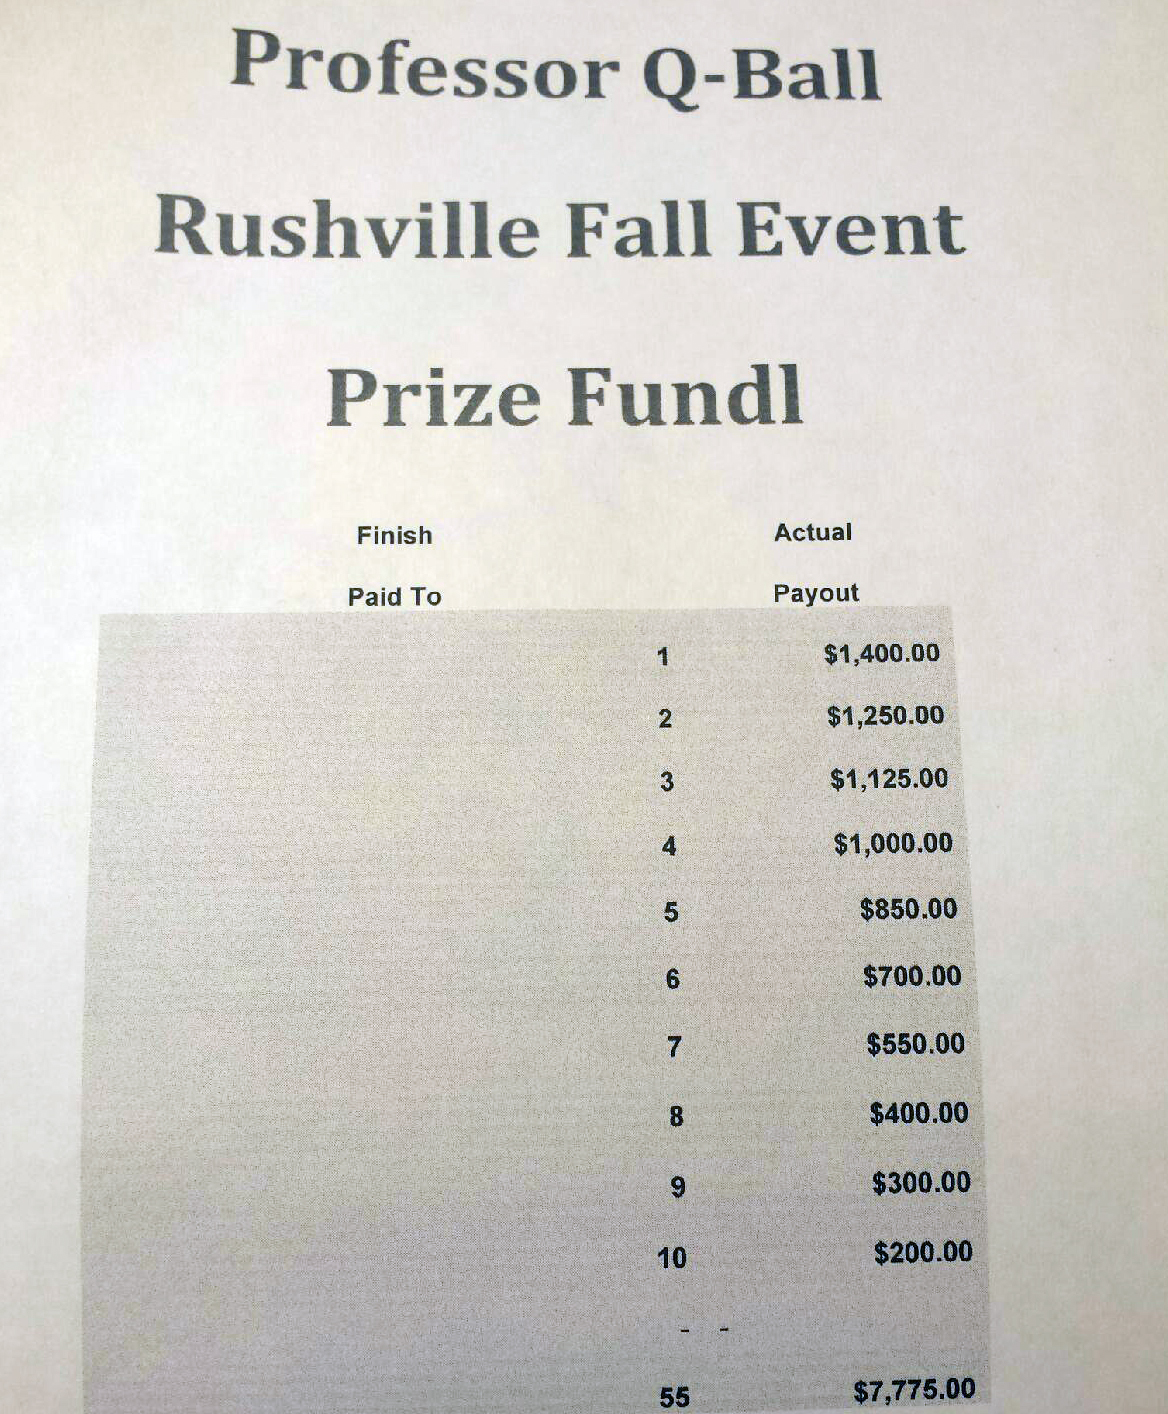 PAYOUT RUSHVILLE